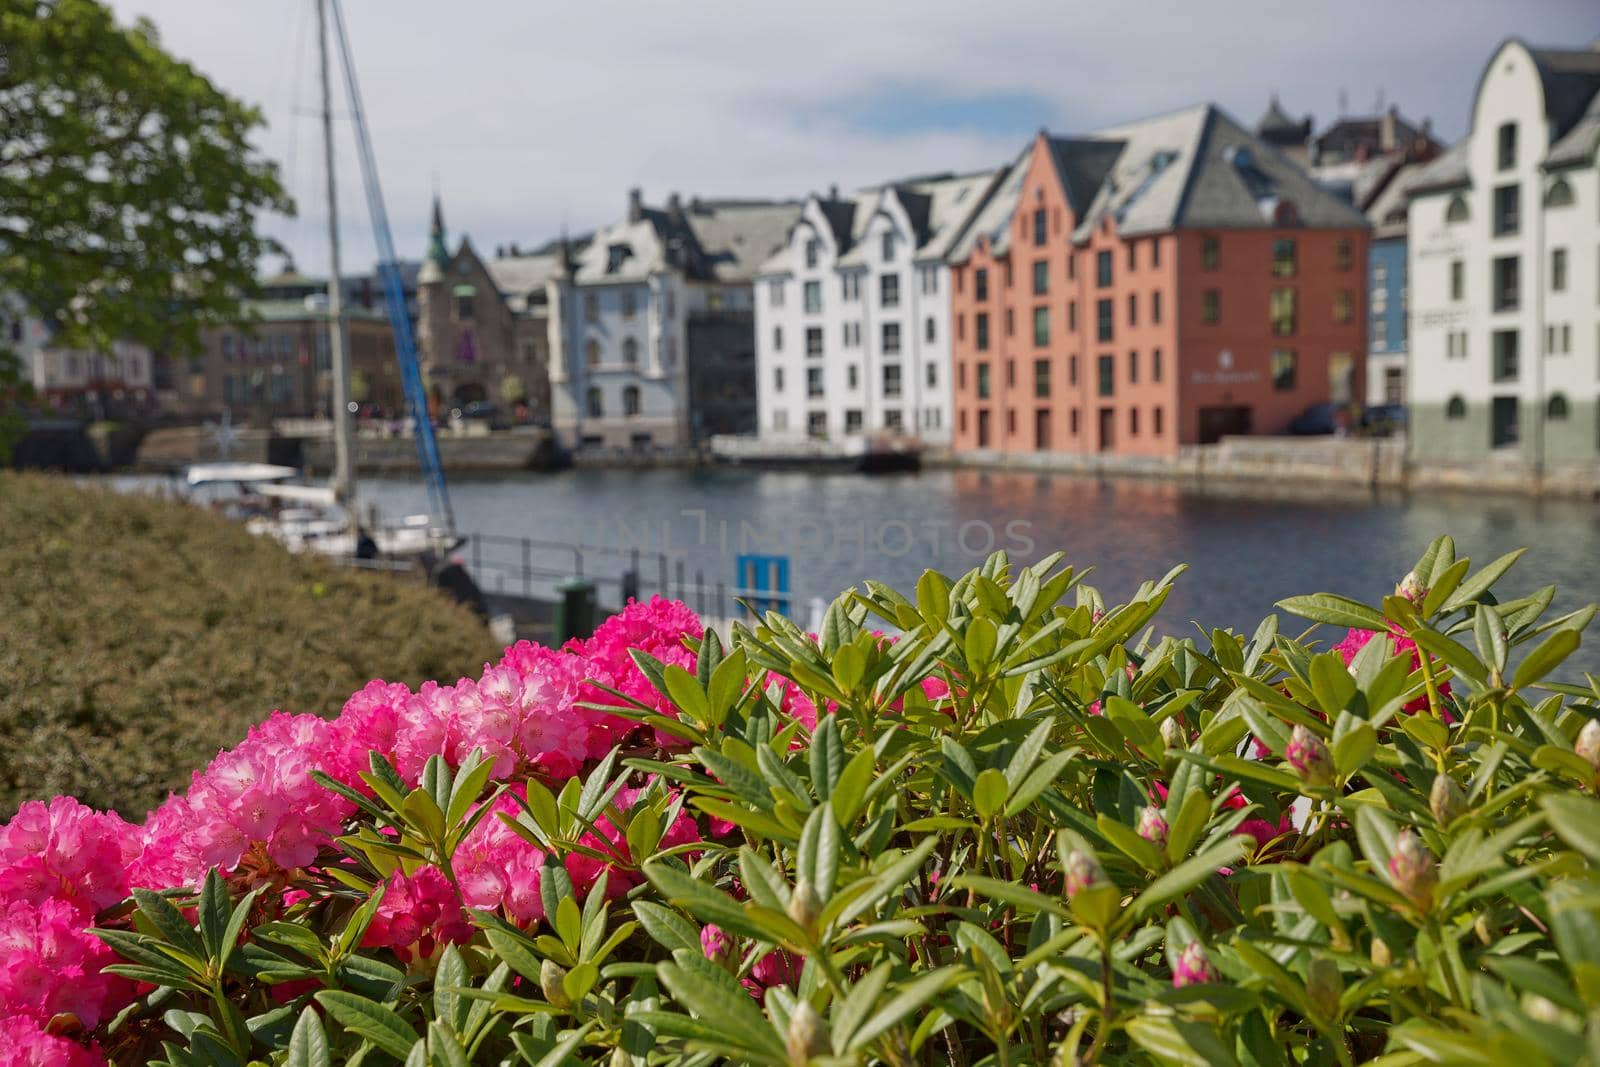 Alesund old town seafront view with Art Nouveau style houses and blooming red flowers.